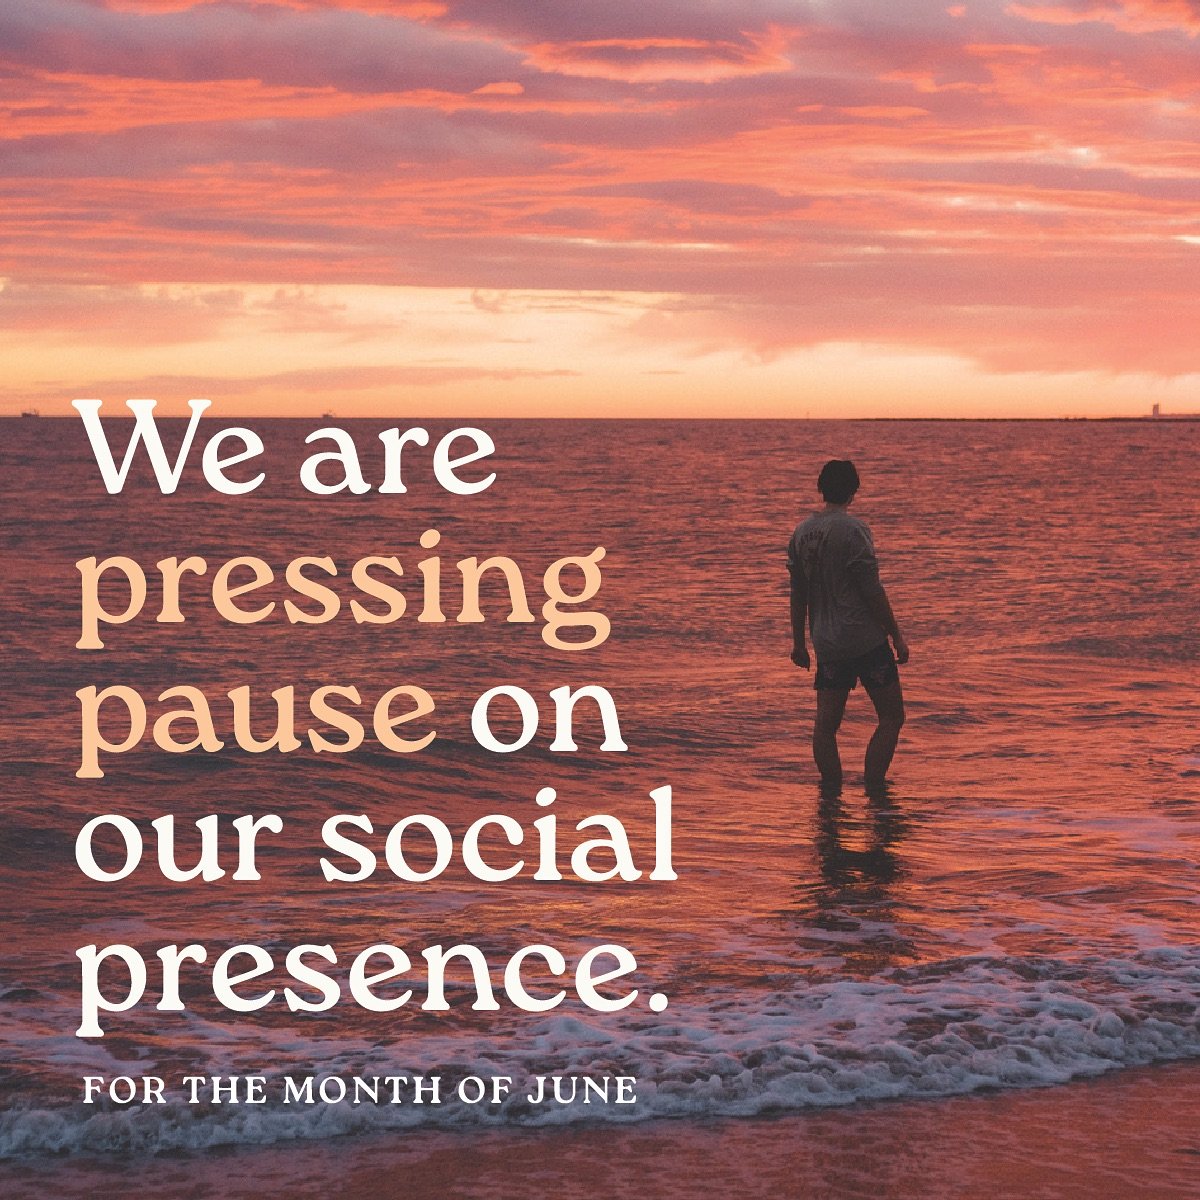 Friends, we are pressing pause on our social presence for the month of June. 

&ldquo;The Lord is my shepherd, I lack nothing.

He makes me lie down in green pastures,
he leads me beside quiet waters,
he refreshes my soul.

He guides me along the rig